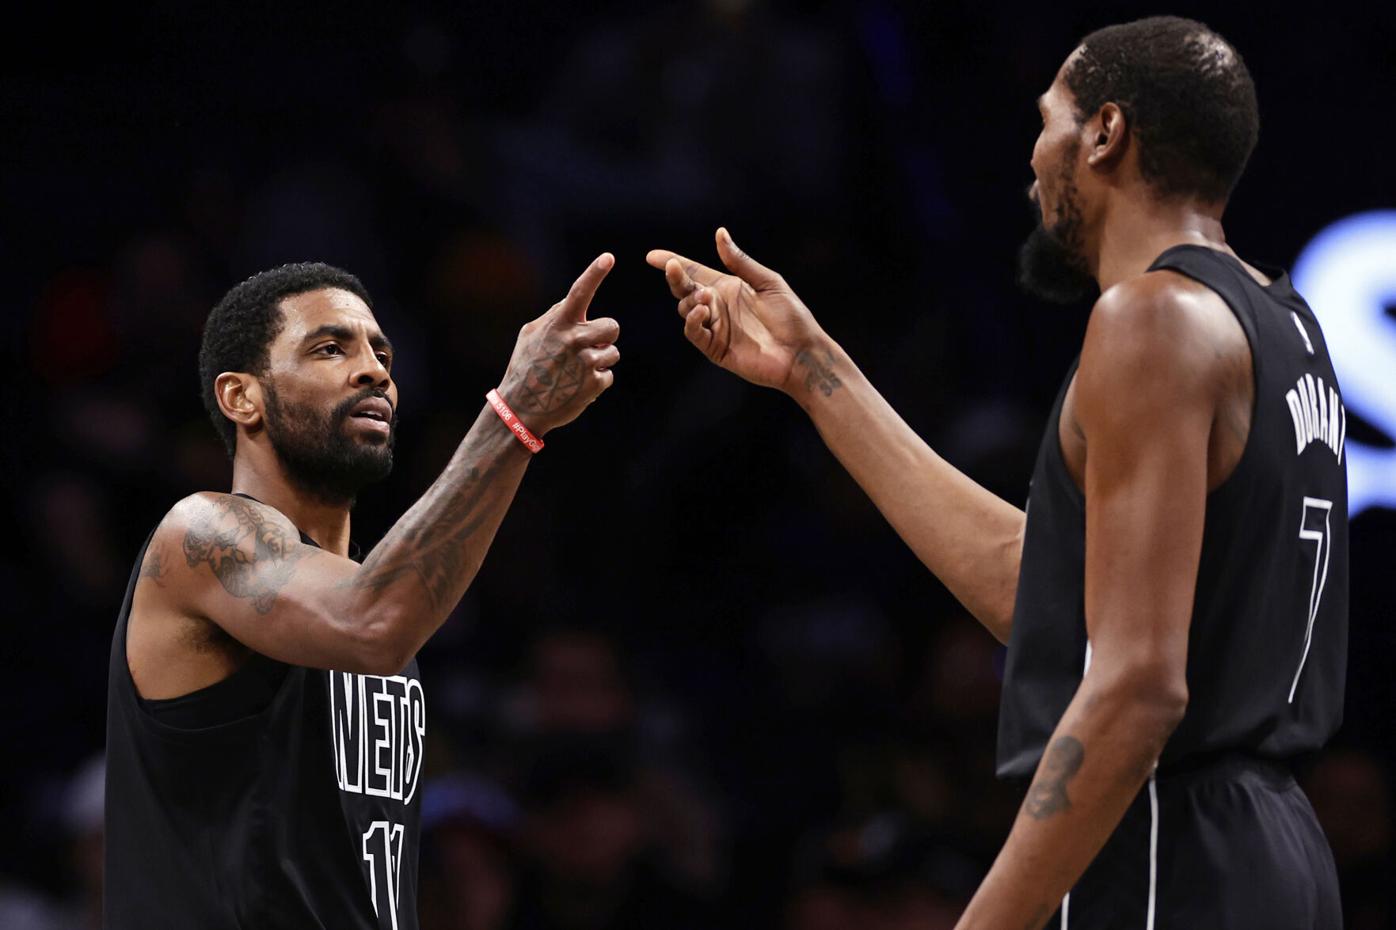 Nets' Nic Claxton says 'our staple is defense' after Monday's win